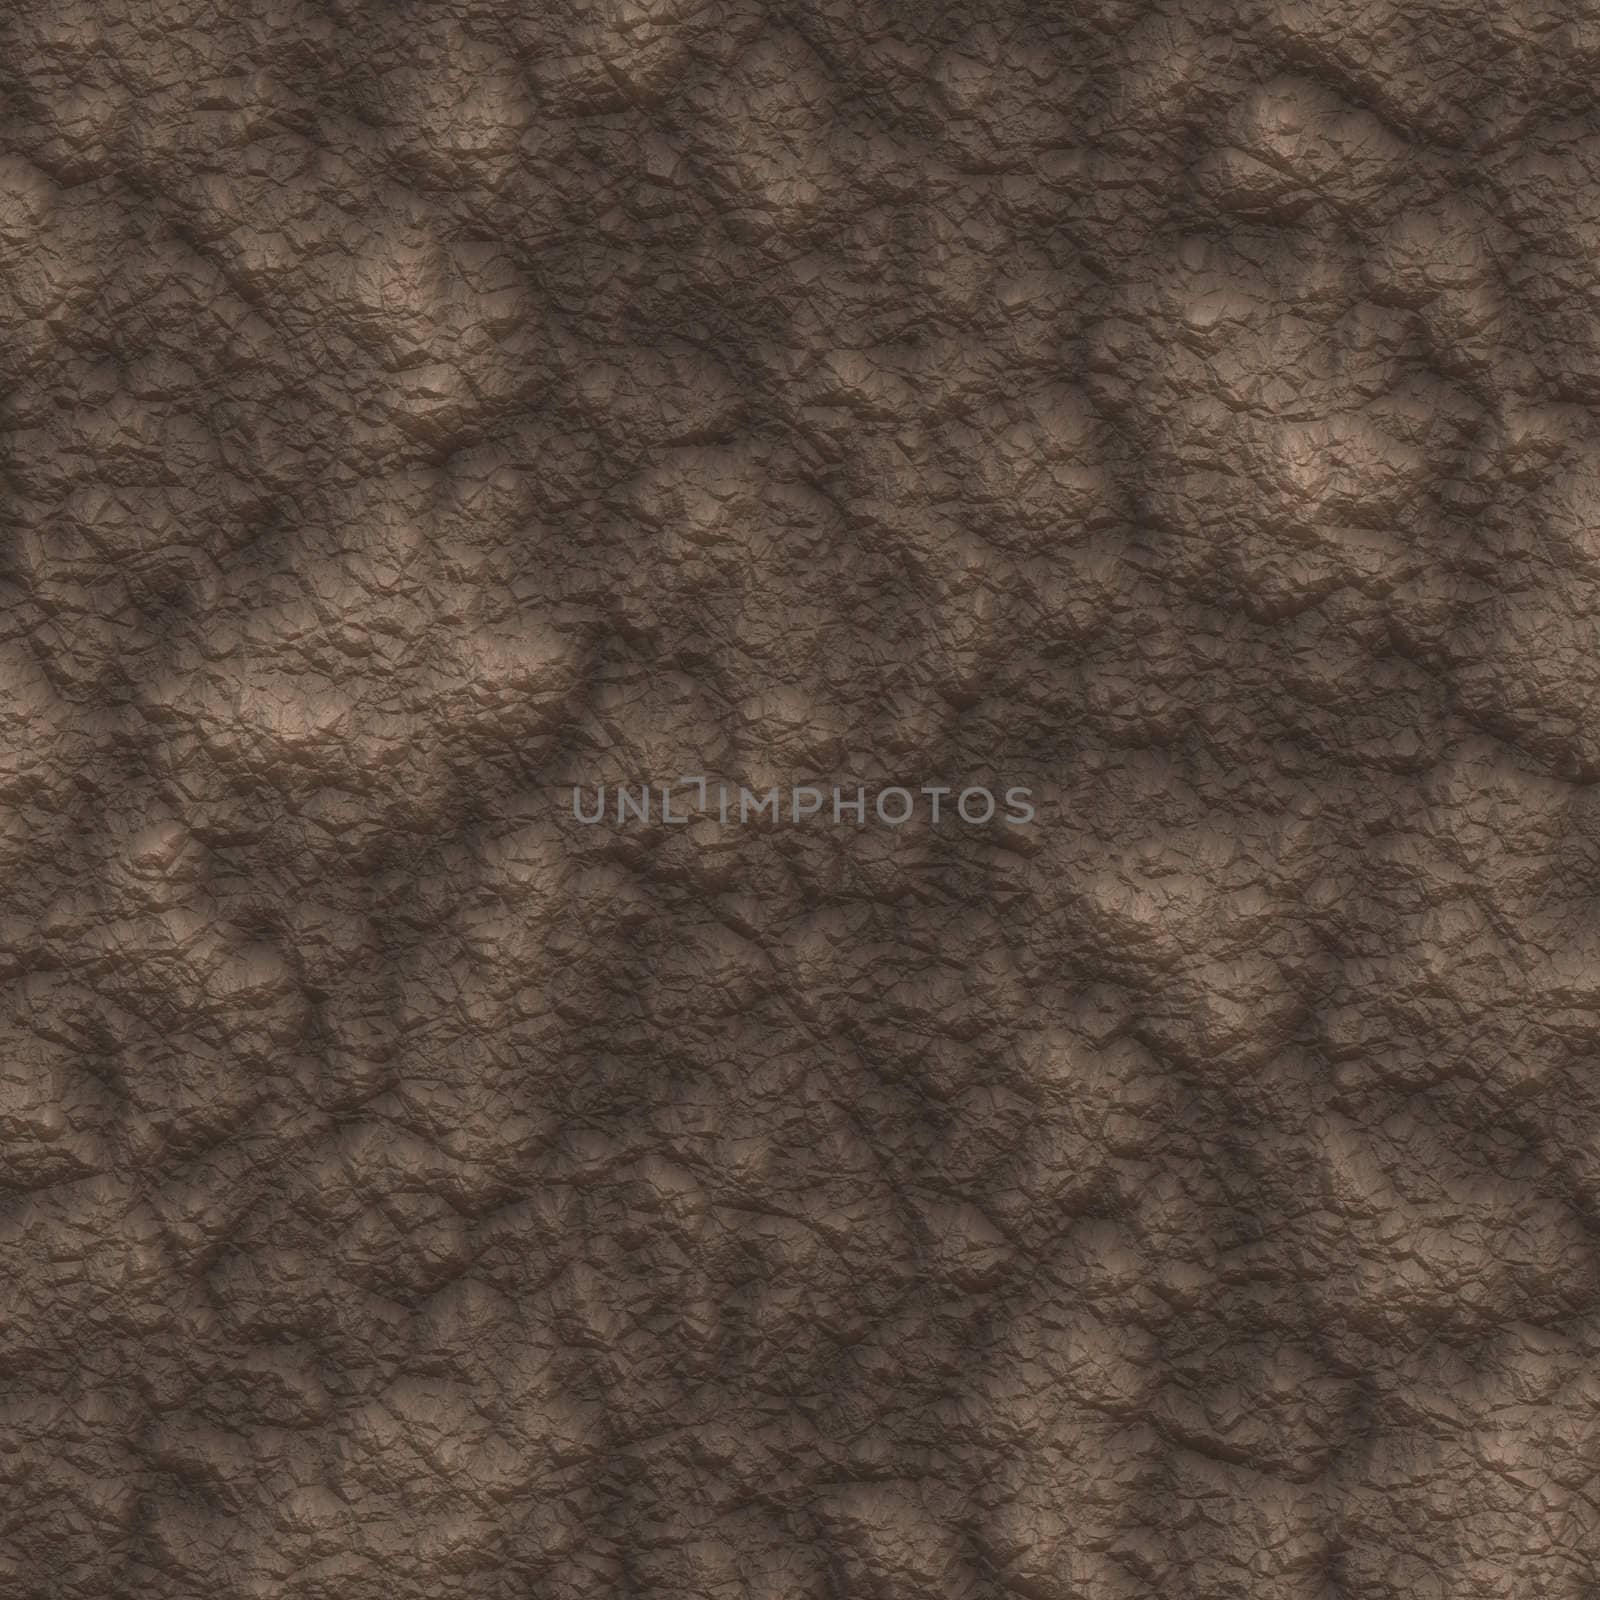 texture of dry brown structured mud or clay